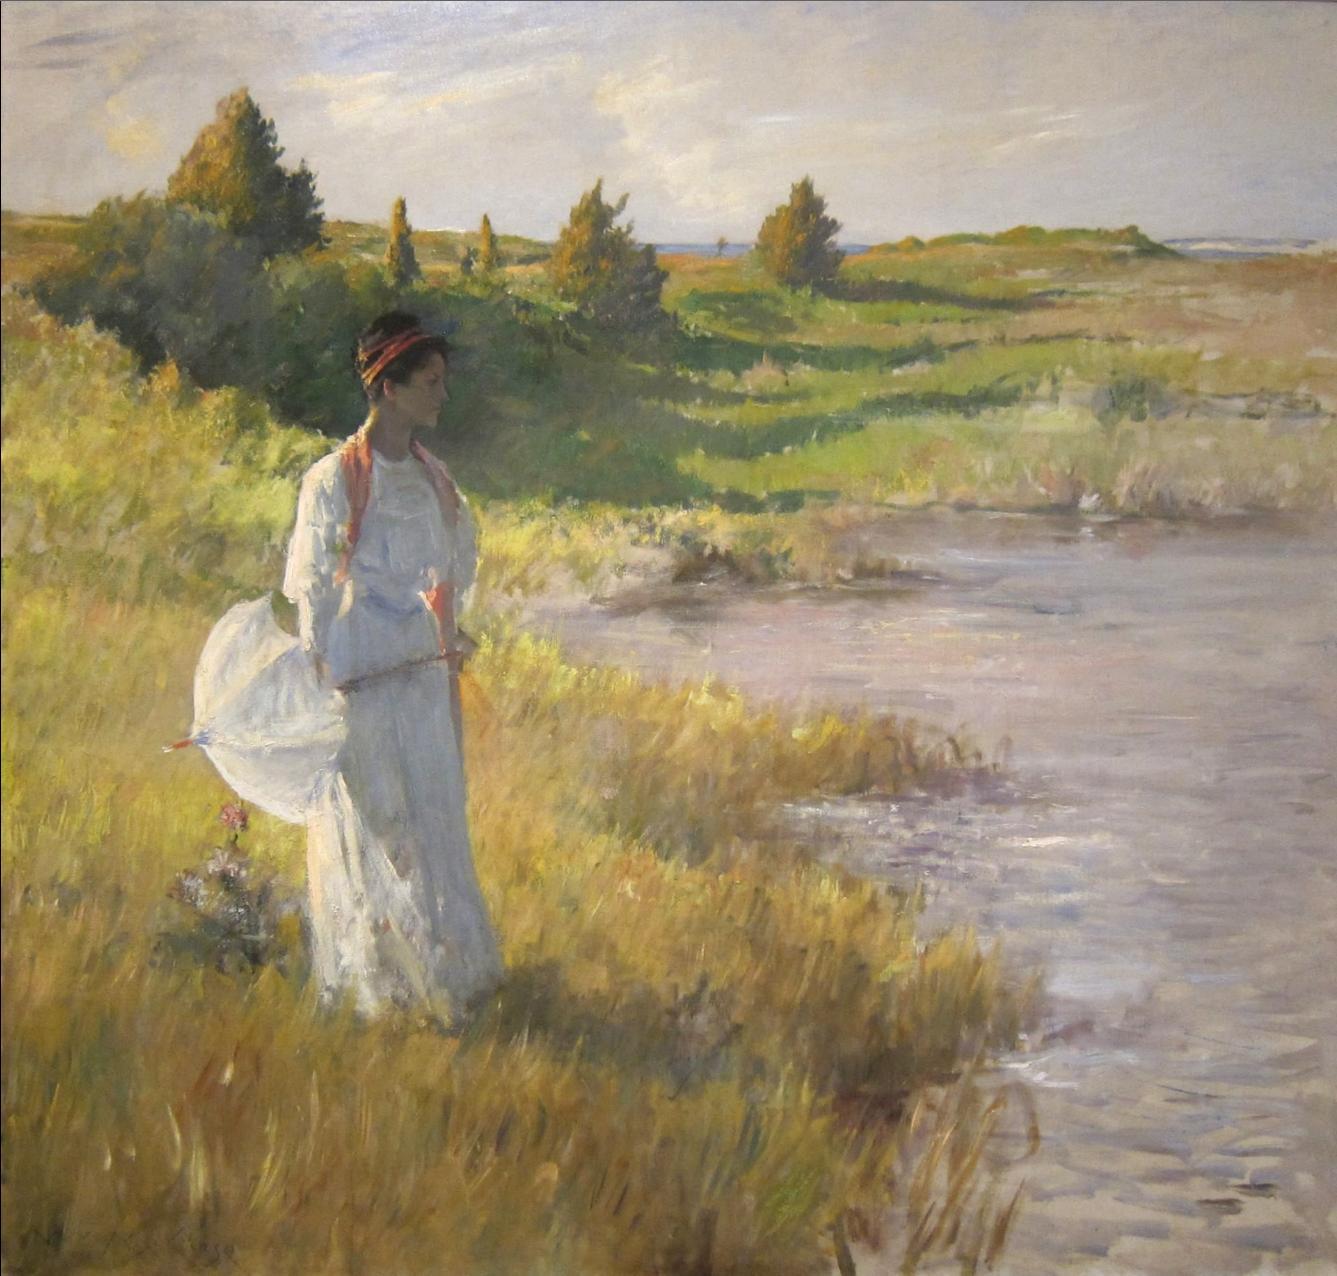 An Afternoon Stroll, c. 1895, William Merritt Chase